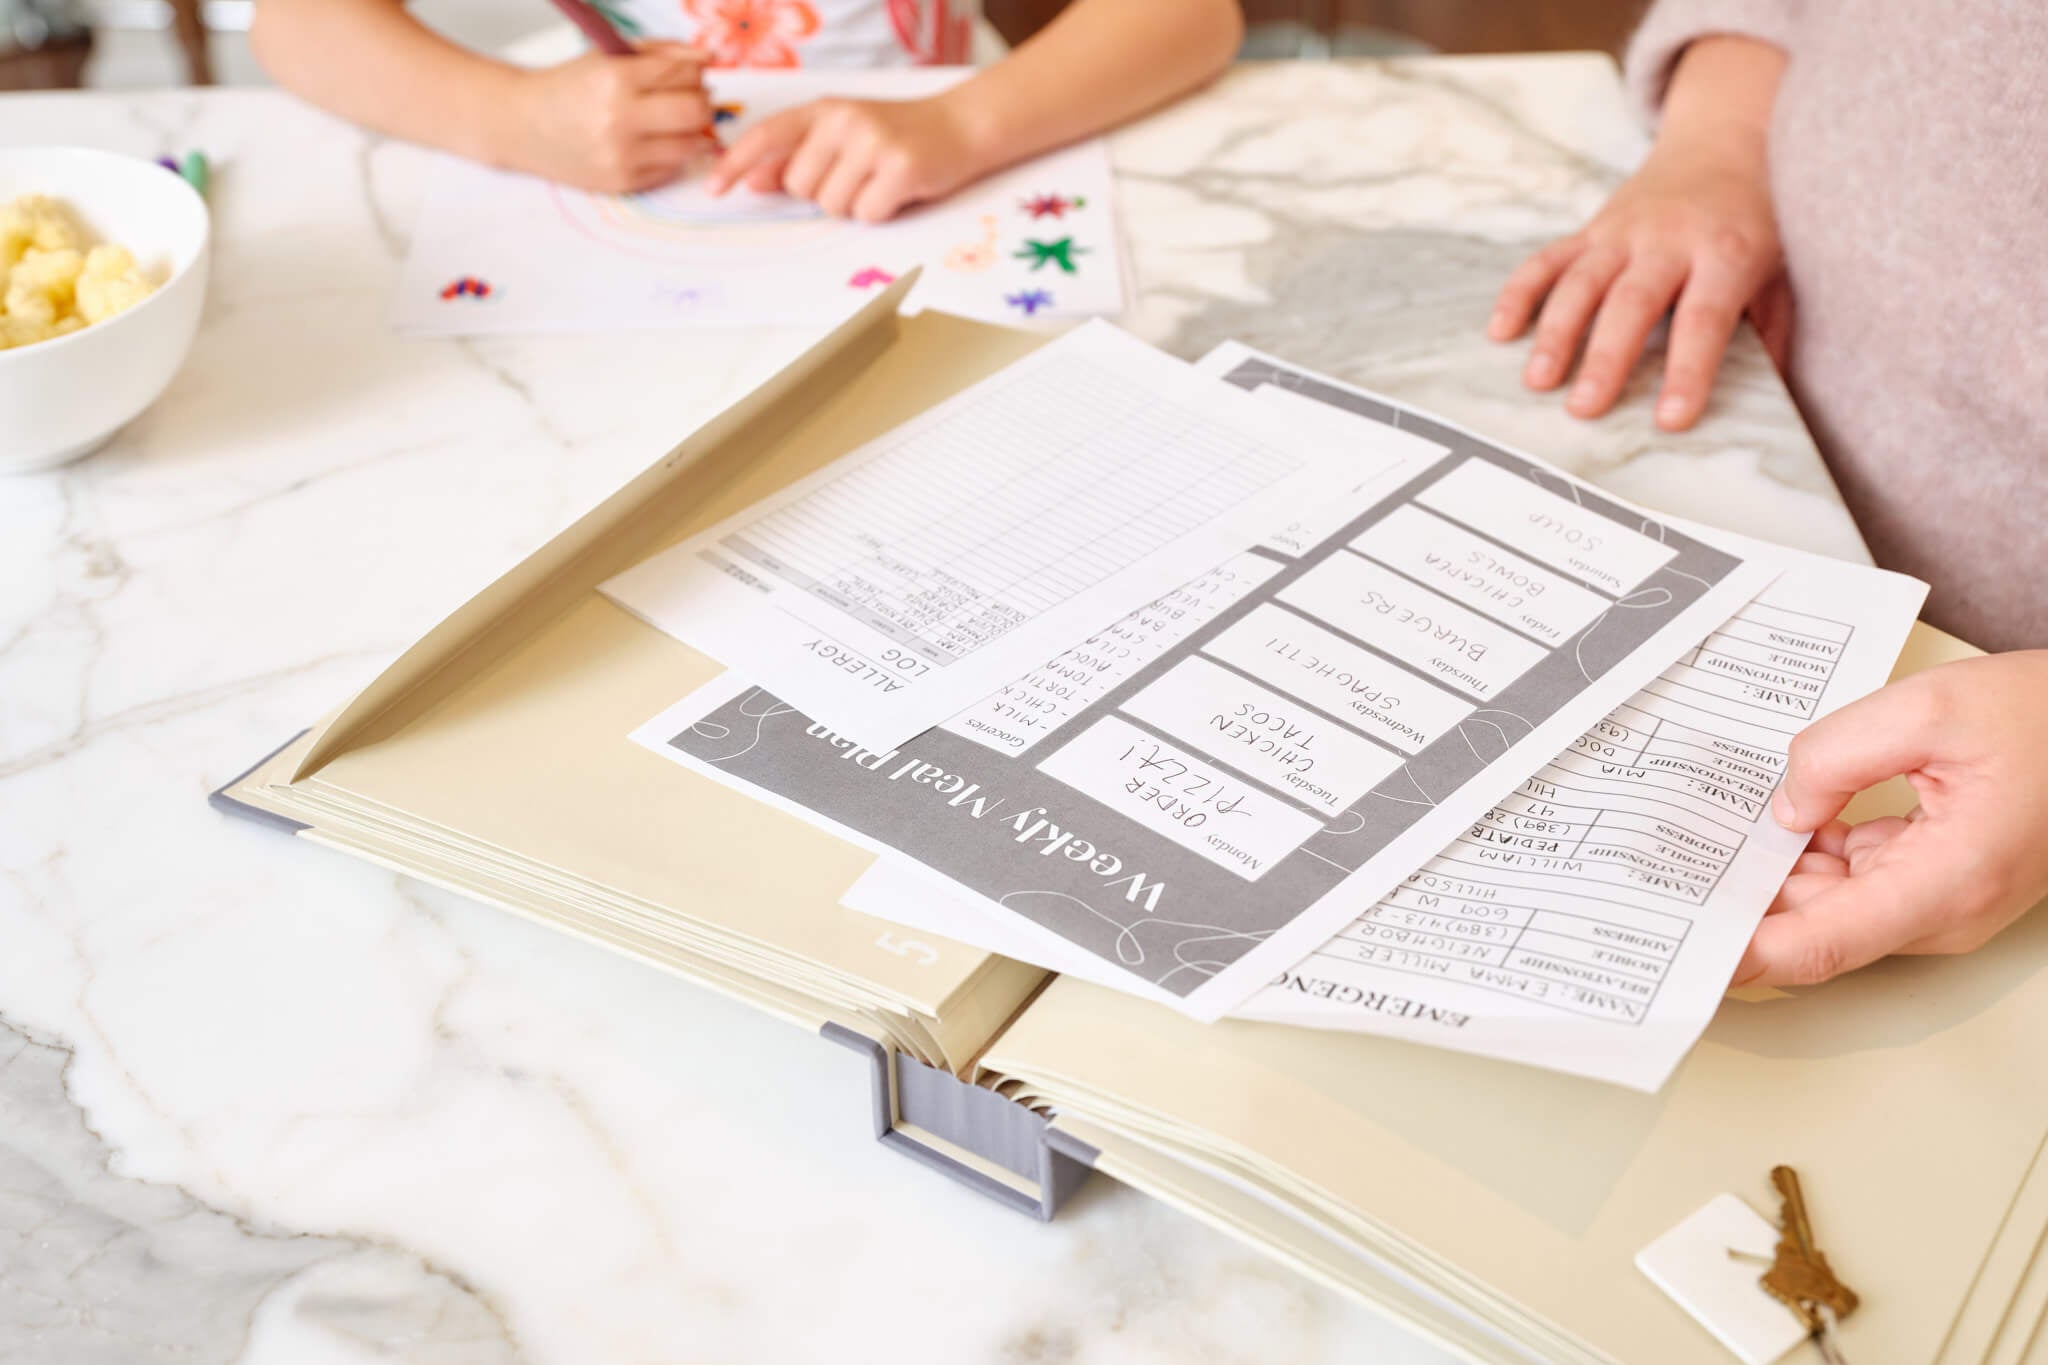 Savor babysitter binder open on table with partially visible worksheets, a woman and a child